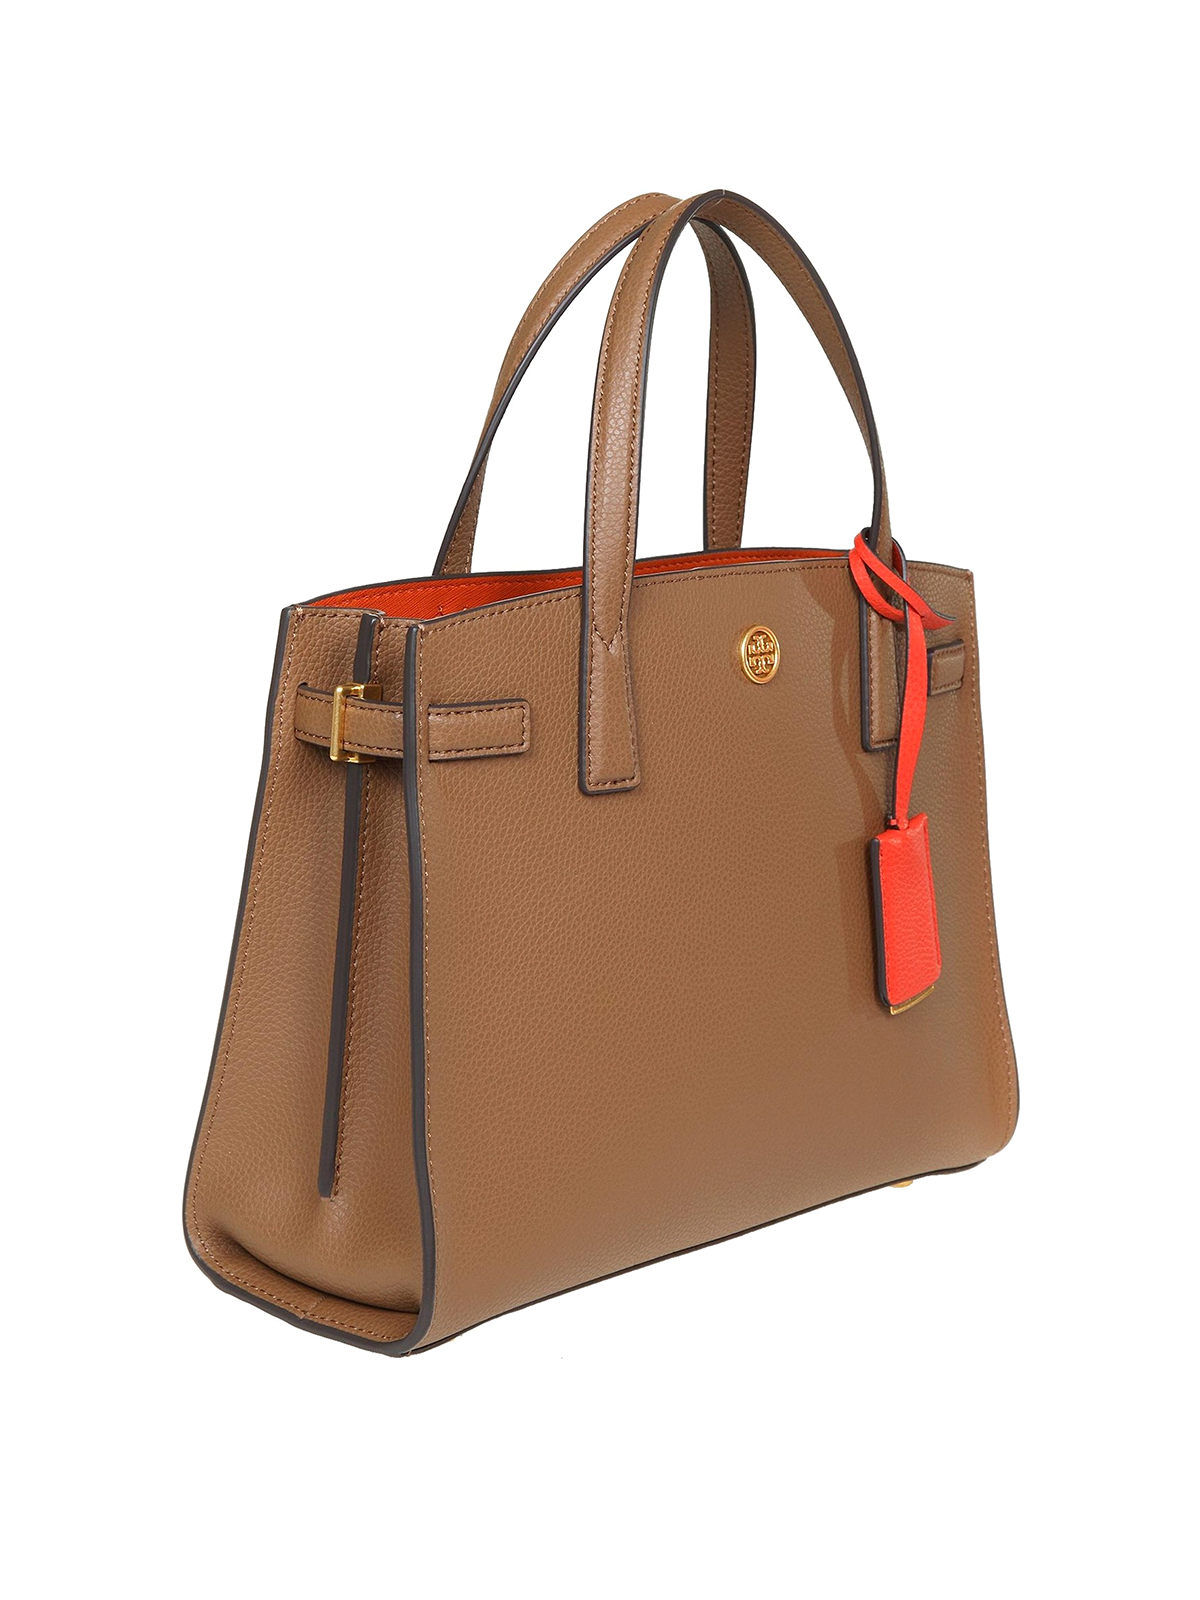 Tory Burch, Bags, Tory Burch Leather Bag Camel Color